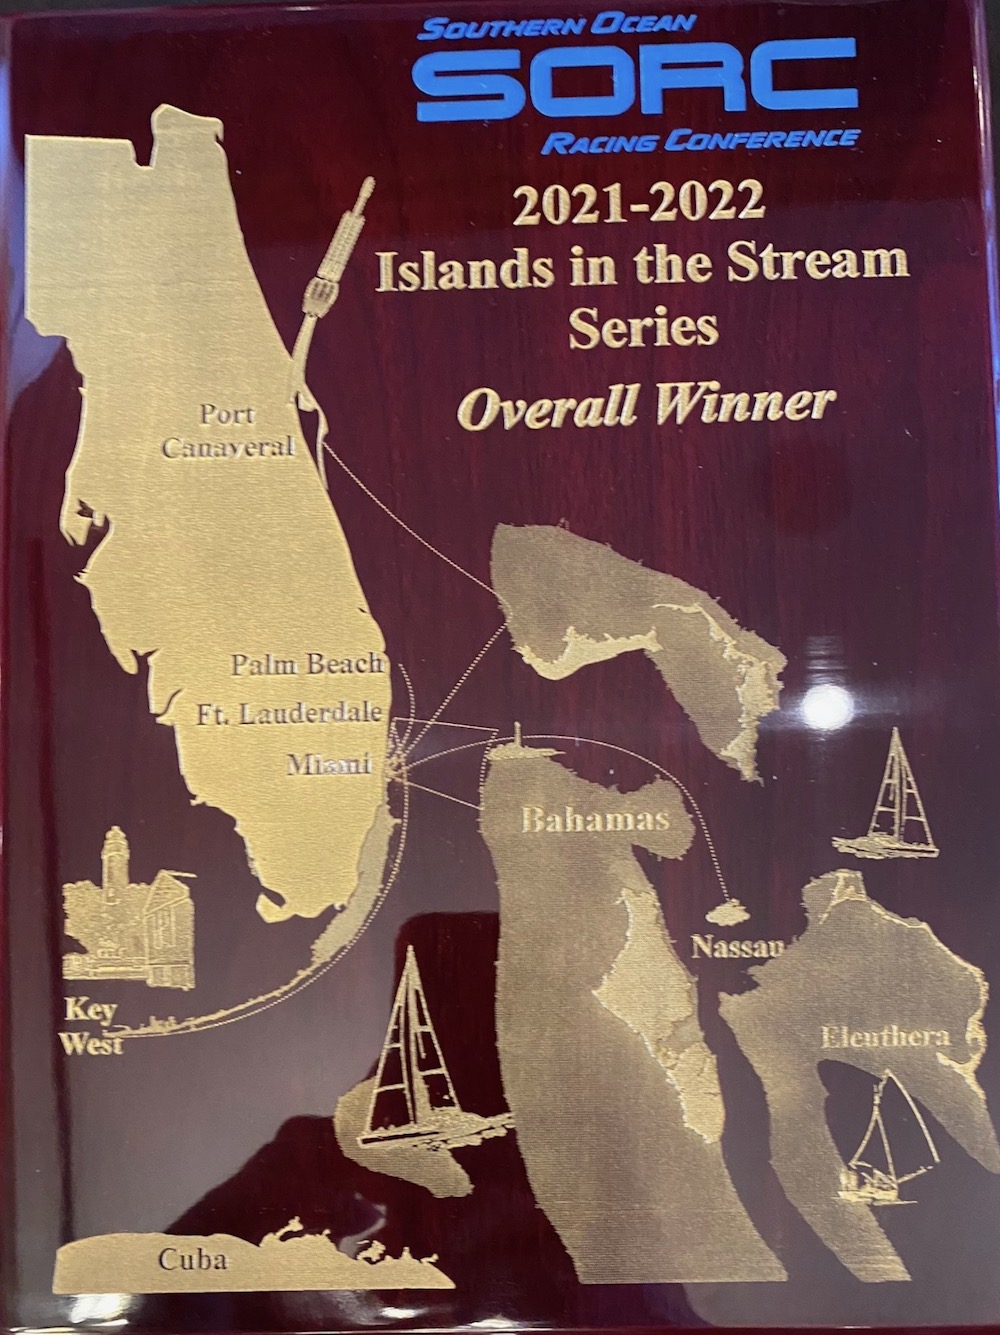 SORC series award with race routes